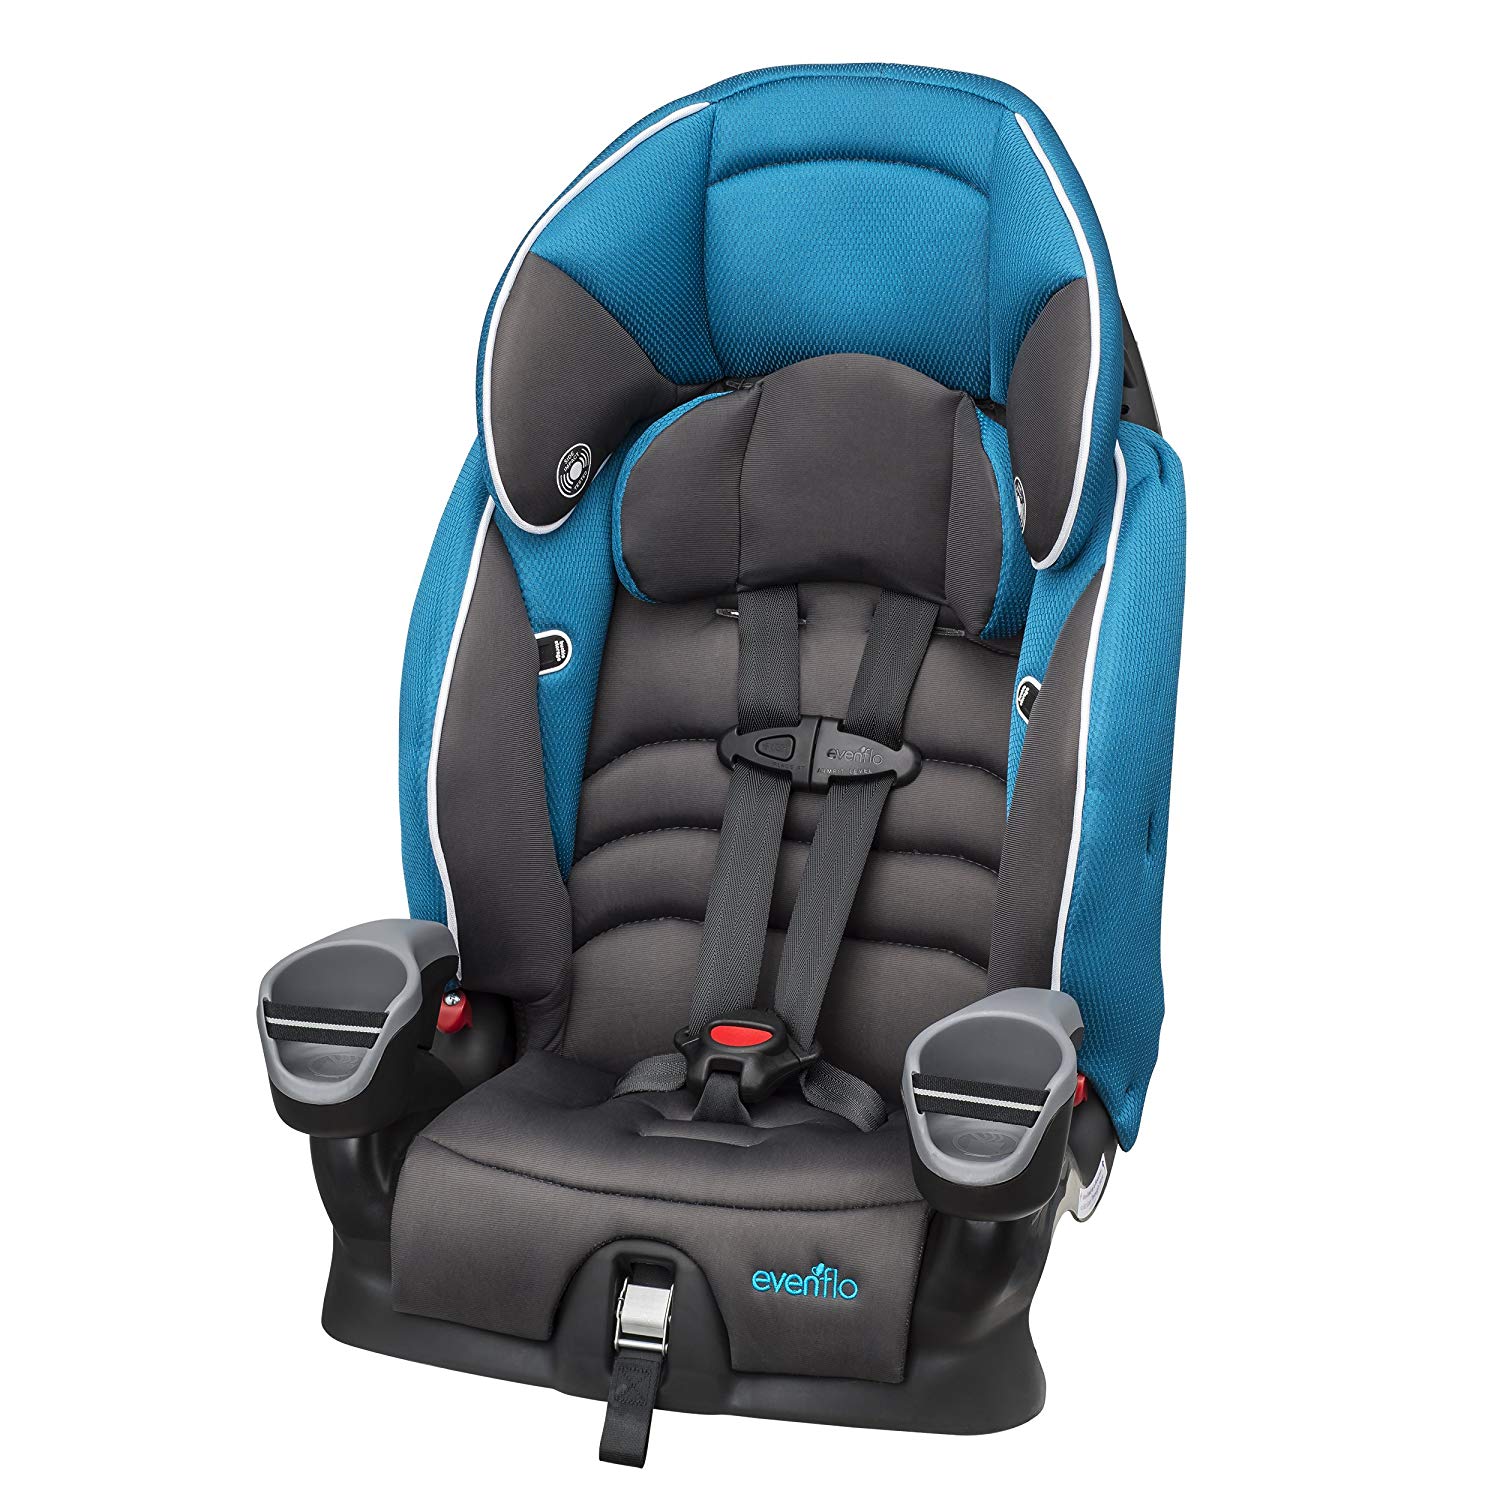 best booster seats, best booster seat 2017, best booster seat, safest booster seat 2017, best booster car seat 2017, best booster car seat, car seat for 4 year old, best toddler booster seat, high back booster seat, best booster seat for 4 year old, best booster seat for 5 year old, car seat for 5 year old, best car seat for 6 eyar old, safest booster seat, best high back booster, booster seat reviews, best booster seats, best booster seat 2017, booster car seat reviews, safest booster seat, safest high back booster, best booster car seat, best booster car seat 2017, safest booster seat 2017, best harness booster seat, best high back booster seat, high back booster seat, high back booster seat reviews, high back booster car seat, booster seat with back, evenflo high back booster, evenflo booster car seat, best high back booster with latch, top rated booster seats, safest booster car seat, high back booster car seat safety rating, graco booster seat, top booster seats, best booster seat for 4 year old, high back booster, safest car seat for 4 year old, best toddler booster seat, big kid booster seat, best 5 point harness booster seat, evenflo booster seat reviews, best high back booster car seat 2016, big kid booster seat reviews, best rated high back booster seats 2016, highest rated booster car seats 2014, best booster seats 2016, best high back booster seat with latch, booster car seat, best rated booster seats, safest booster car seat 2017, big kid car seat, evenflo amp high back booster, evenflo big kid amp, best booster seat for 5 year old, booster with back, safest booster seat 2016, evenflo amp booster seat, top rated booster seats 2017, booster car seat reviews 2016, high back booster seat with harness, best booster, car seat booster combo, top booster seats 2017, evenflo big kid high back booster, toddler booster car seat reviews, high back booster car seat reviews, safest high back booster car seat, youth booster seat reviews, harness booster seat reviews, evenflo booster seat, safest backless booster seat 2016, evenflo amp high back booster car seat, best child booster seat, best harness to booster car seat, booster car seats for toddlers reviews, best kids booster seat, best car seat for 4 year old, high back car seat, booster seat ratings, most comfortable booster seat, best rated booster car seats, harness booster seat, best booster car seats 2016, best britax booster seat, highest rated booster seats, best harness booster, graco booster seat with back, best booster 2016, best car booster seats 2017, best harness booster seat 2017, graco affix safety rating, evenflo big kid amp booster car seat, britax booster seat reviews, best car seat for 6 year old, best booster car seat, booster car seat with harness, 5 point harness booster, car seat safety ratings, top rated car seats 2017, top rated toddler car seats, toddler car seat reviews, safest car seat for 5 year old, best car seat for 1 year old, best rated car seats, car seat that truns into booster, car seat that converts to booster, safest toddler car seat, convertible booster car seat, car seat for 4 year old, 5 point harness booster seat, toddler booster car seat, car seat for 5 ear old, safest car seats, car seat for 3 year old, best car seat for 3 year old, harness booster seat, best toddler car seat, safest car seat for 4 year old, best car seat for 5 year old, best car seat for 4 year old, 5 point harness booster seat, best booster seats, harness booster seat, 5 point harness booster, best booster seat 2017, safest booster seat 2017, convertible booster car seat, five point harness booster seat, booster car seat with harness, 5 point booster seat, backless booster seat, best booster car seat, safest booster car seat 2017, 5 point harness car seat, high back booster seat with 5 point harness, safest booster seat, best booster car seat 2017, convertible booster seat, best harness booster seat, best backless booster seat, 5 point harness booster seat for over 40 lbs, best high back booster, high back booster with 5 point harness, best 5 point harness booster seat, safest 5 point harness booster seat, booster seat reviews, combination car seat, graco affix backless booster, backless booster car seat, toddler booster car seat, high back booster with harness, booster car seat with 5 point harness, top rated booster seats 2017, cheap booster seats, harness booster, top rated booster seats, safest car seat for 4 year old, booster seat with latch, booster car seat, most comfortable booster seat 2017, top booster seats 2017, car seat that converts to booster, five point harness booster, big kid booster seat, travel booster car seat, best high back booster seat, high back booster seat with harness, combination booster car seat, best booster car seat, best harness booster seat, best booster seats, most comfortable booster seat, best booster car seat 2017, booster car seat, booster car seat reviews, best toddler booster seat, comfortable booster seat, safest booster seat, high back booster with latch, booster seat with latch system, best booster, best booster seat 2017, best high back booster seat, best 5 point harness booster seat, best high back booster, safest booster seat 2017, best booster seats 2016, booster seat reviews, best booster seat for 4 year old, booster seat with latch, best booster seat for 5 year old